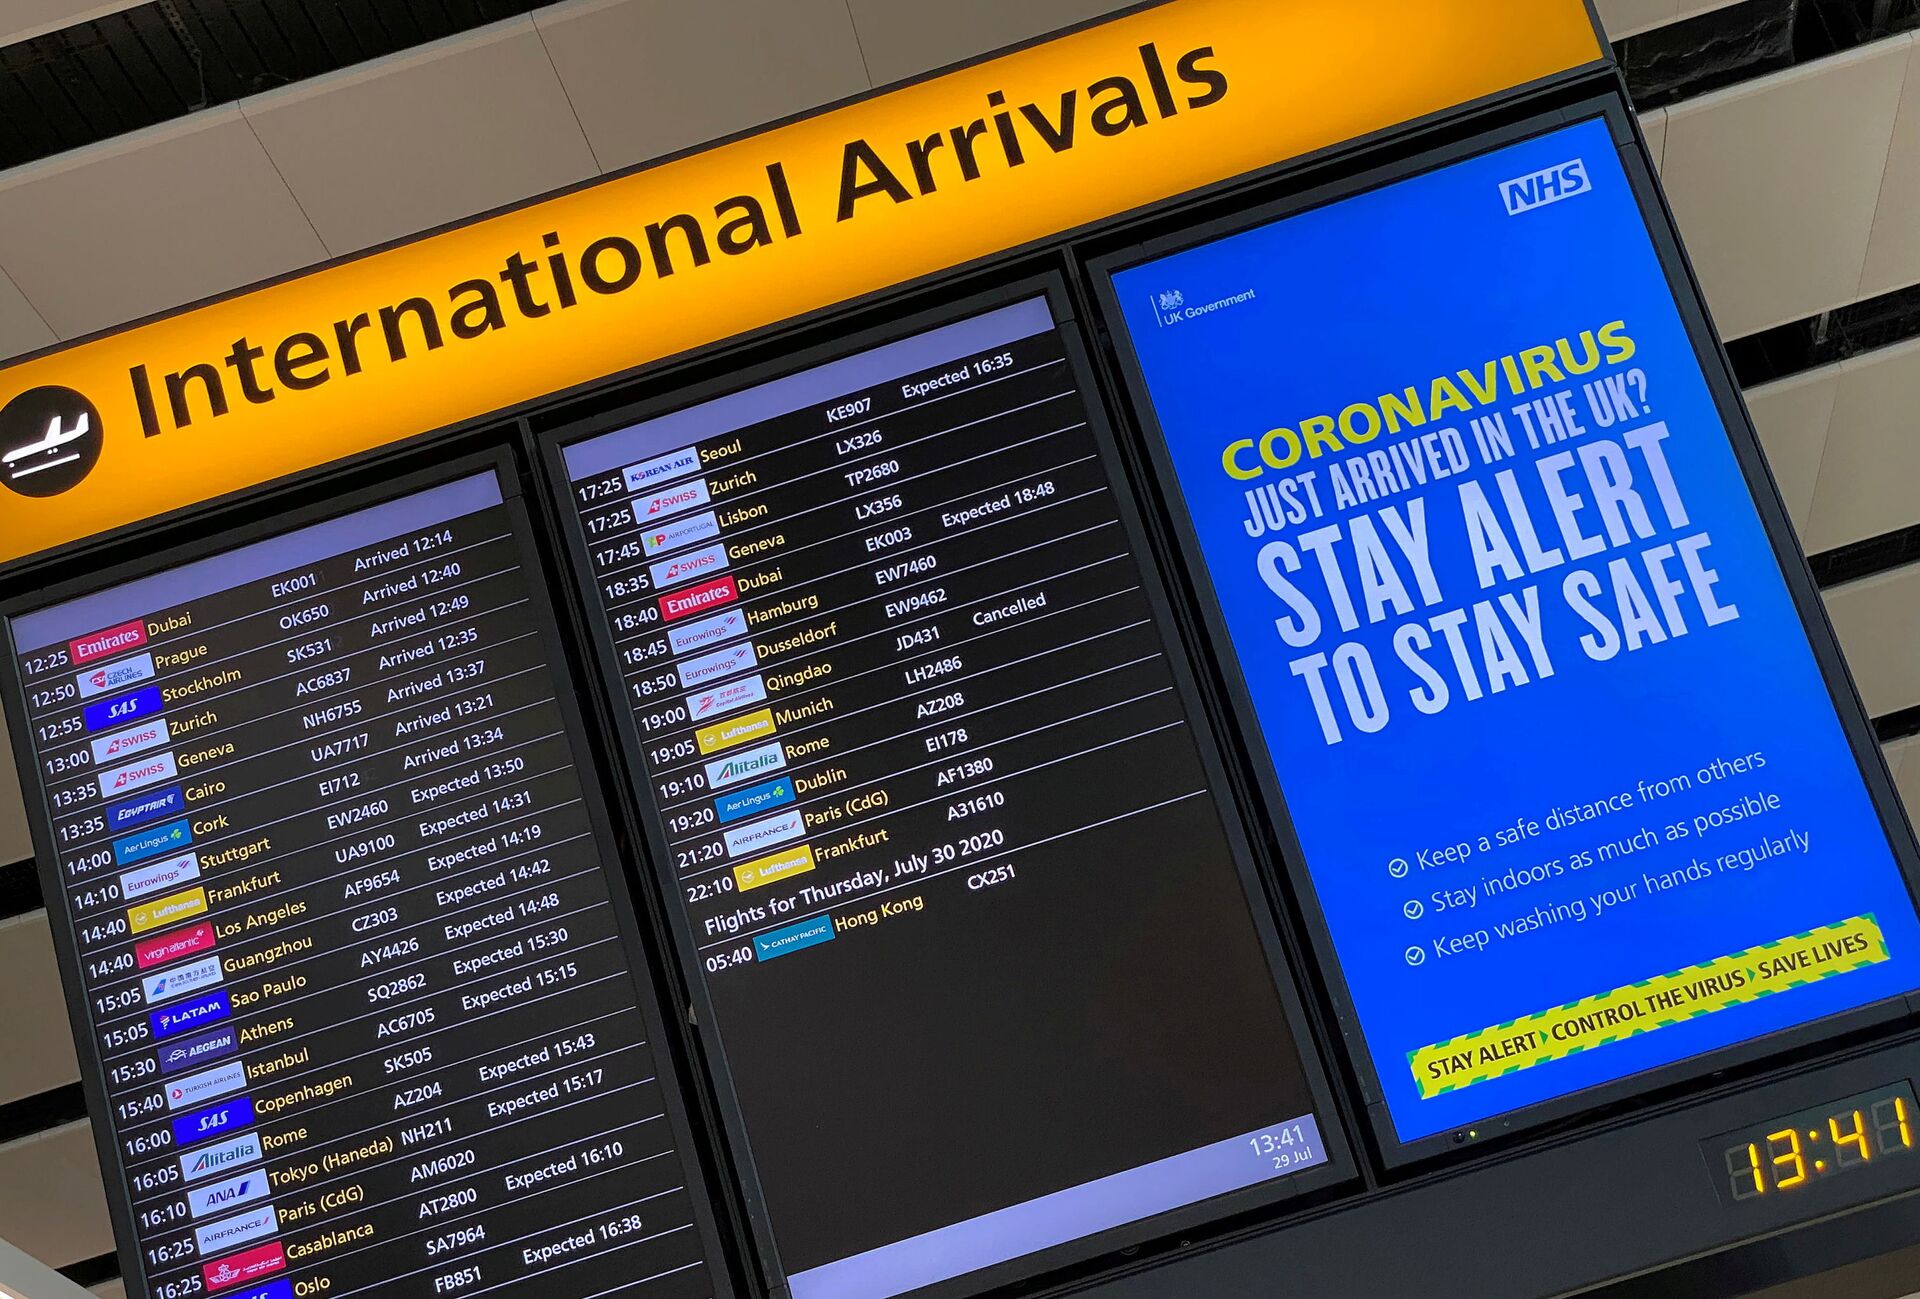 A public health campaign message is displayed on an arrivals information board at Heathrow Airport, following the outbreak of the coronavirus disease (COVID-19), London, Britain, July 29, 2020 - Sputnik International, 1920, 07.09.2021